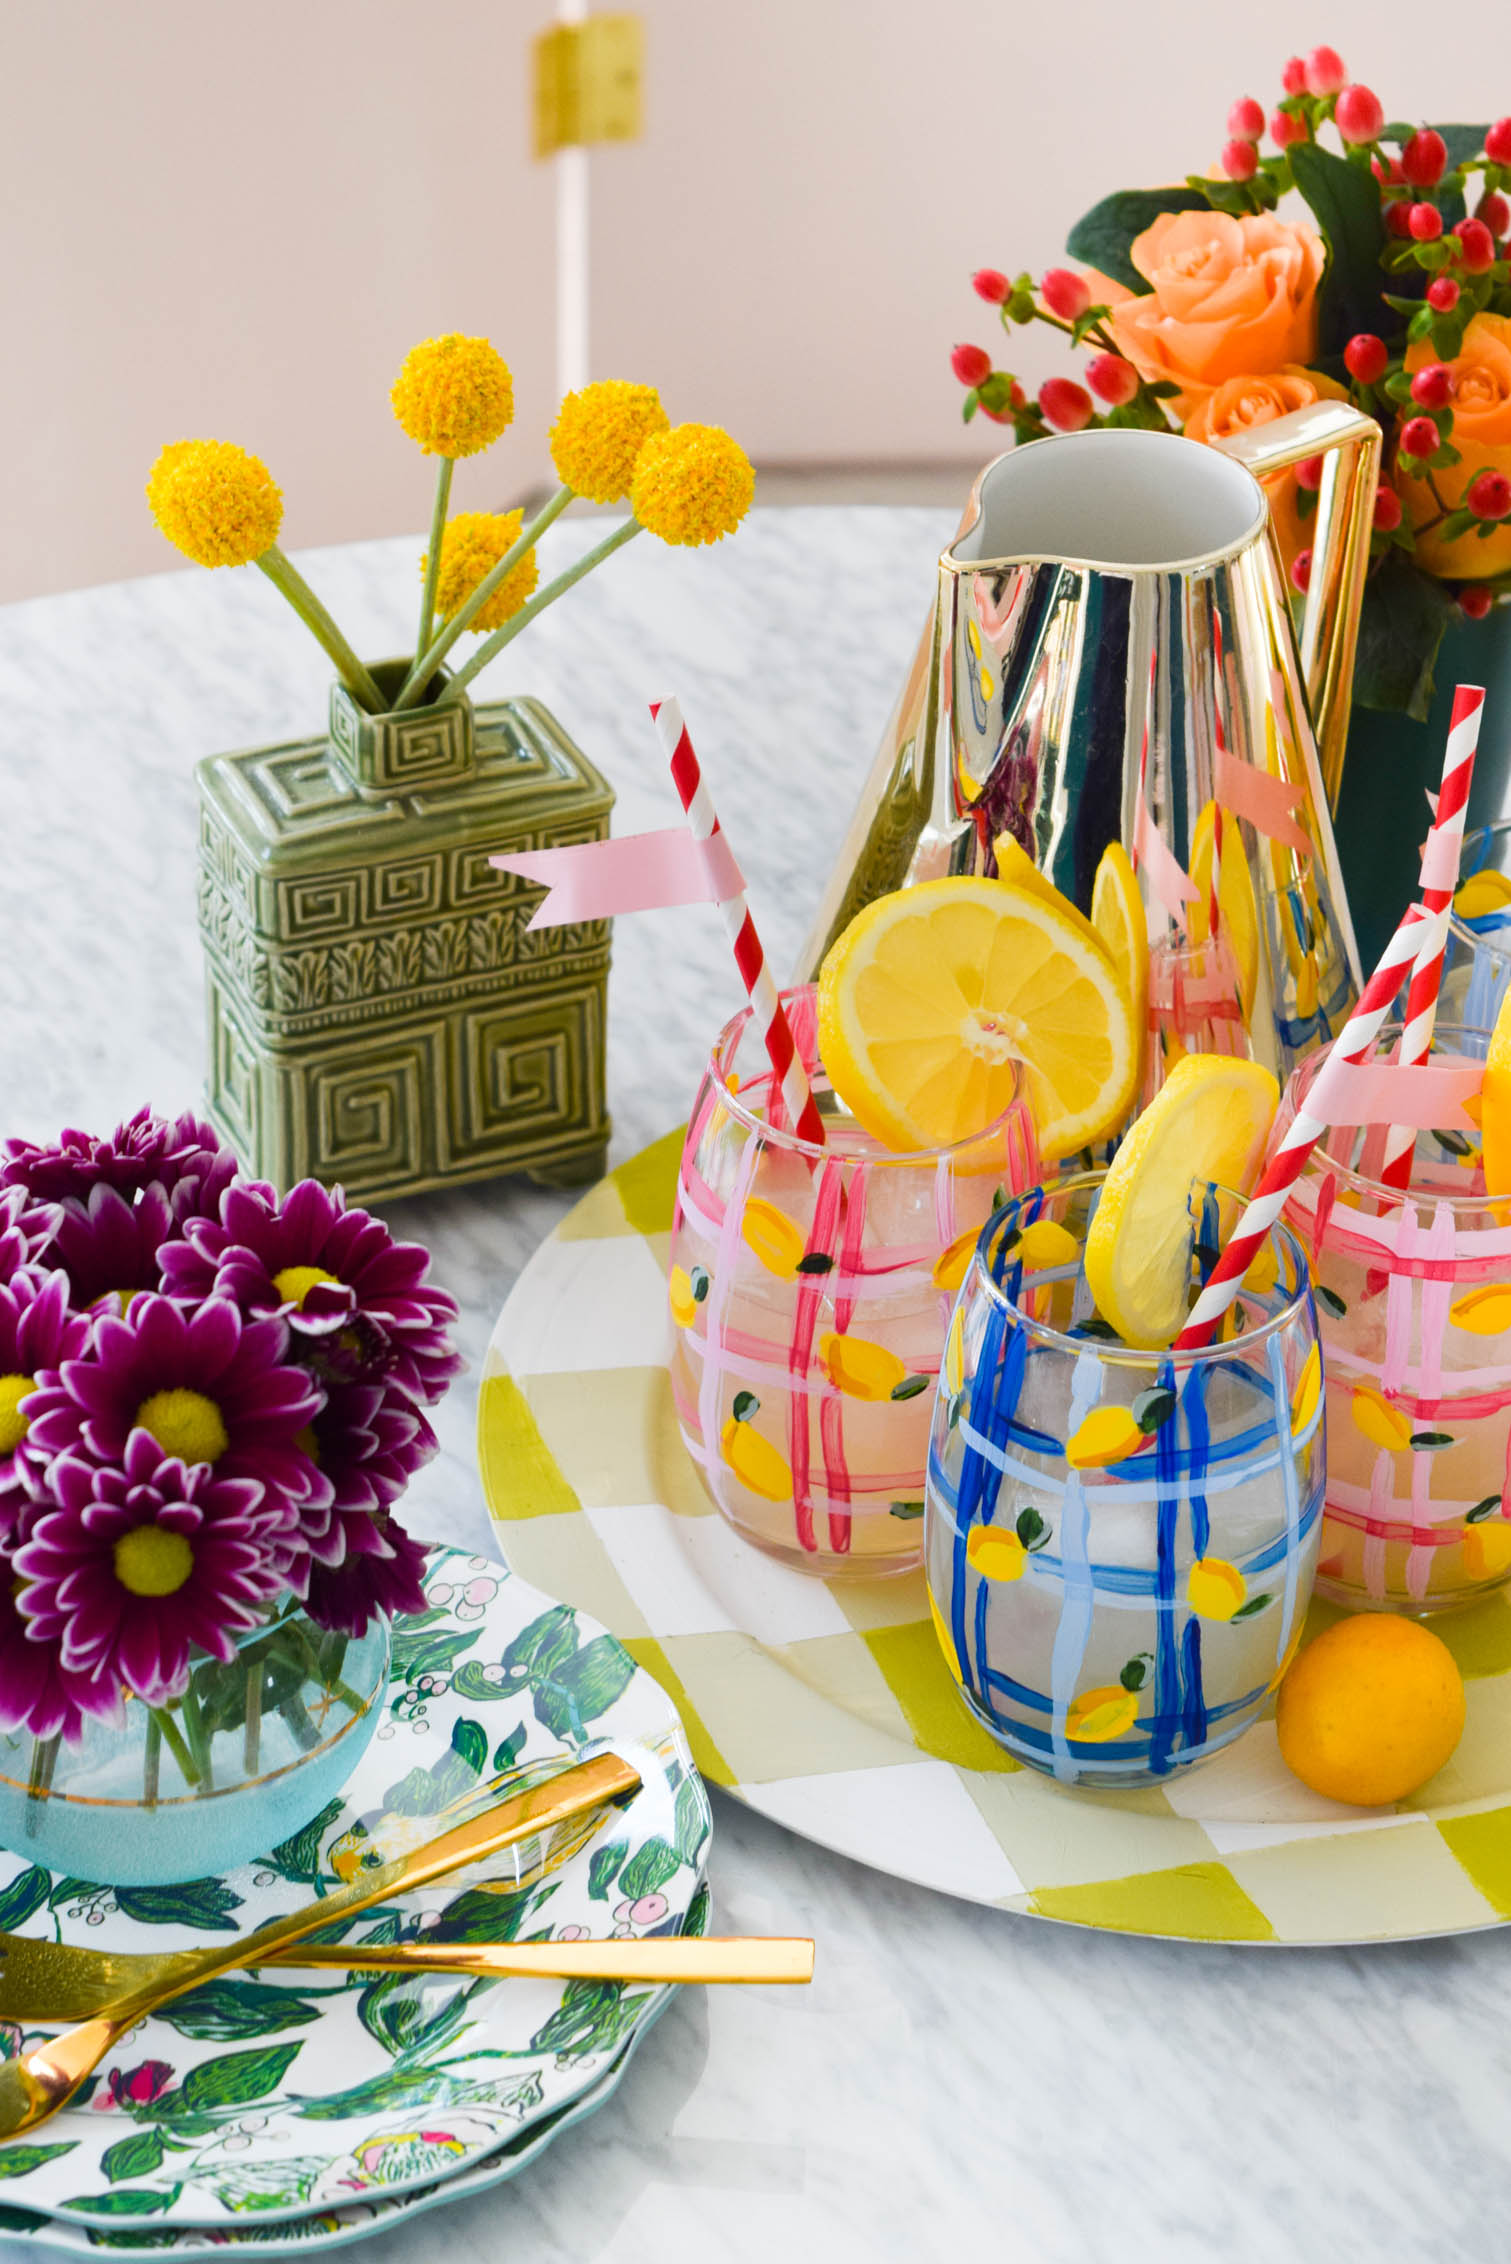 My DIY Painted Plaid & Lemon Glasses are the cutest thing you'll see all day. You can make your own summer drinkware with a retro and fun vibe, in just an afternoon.